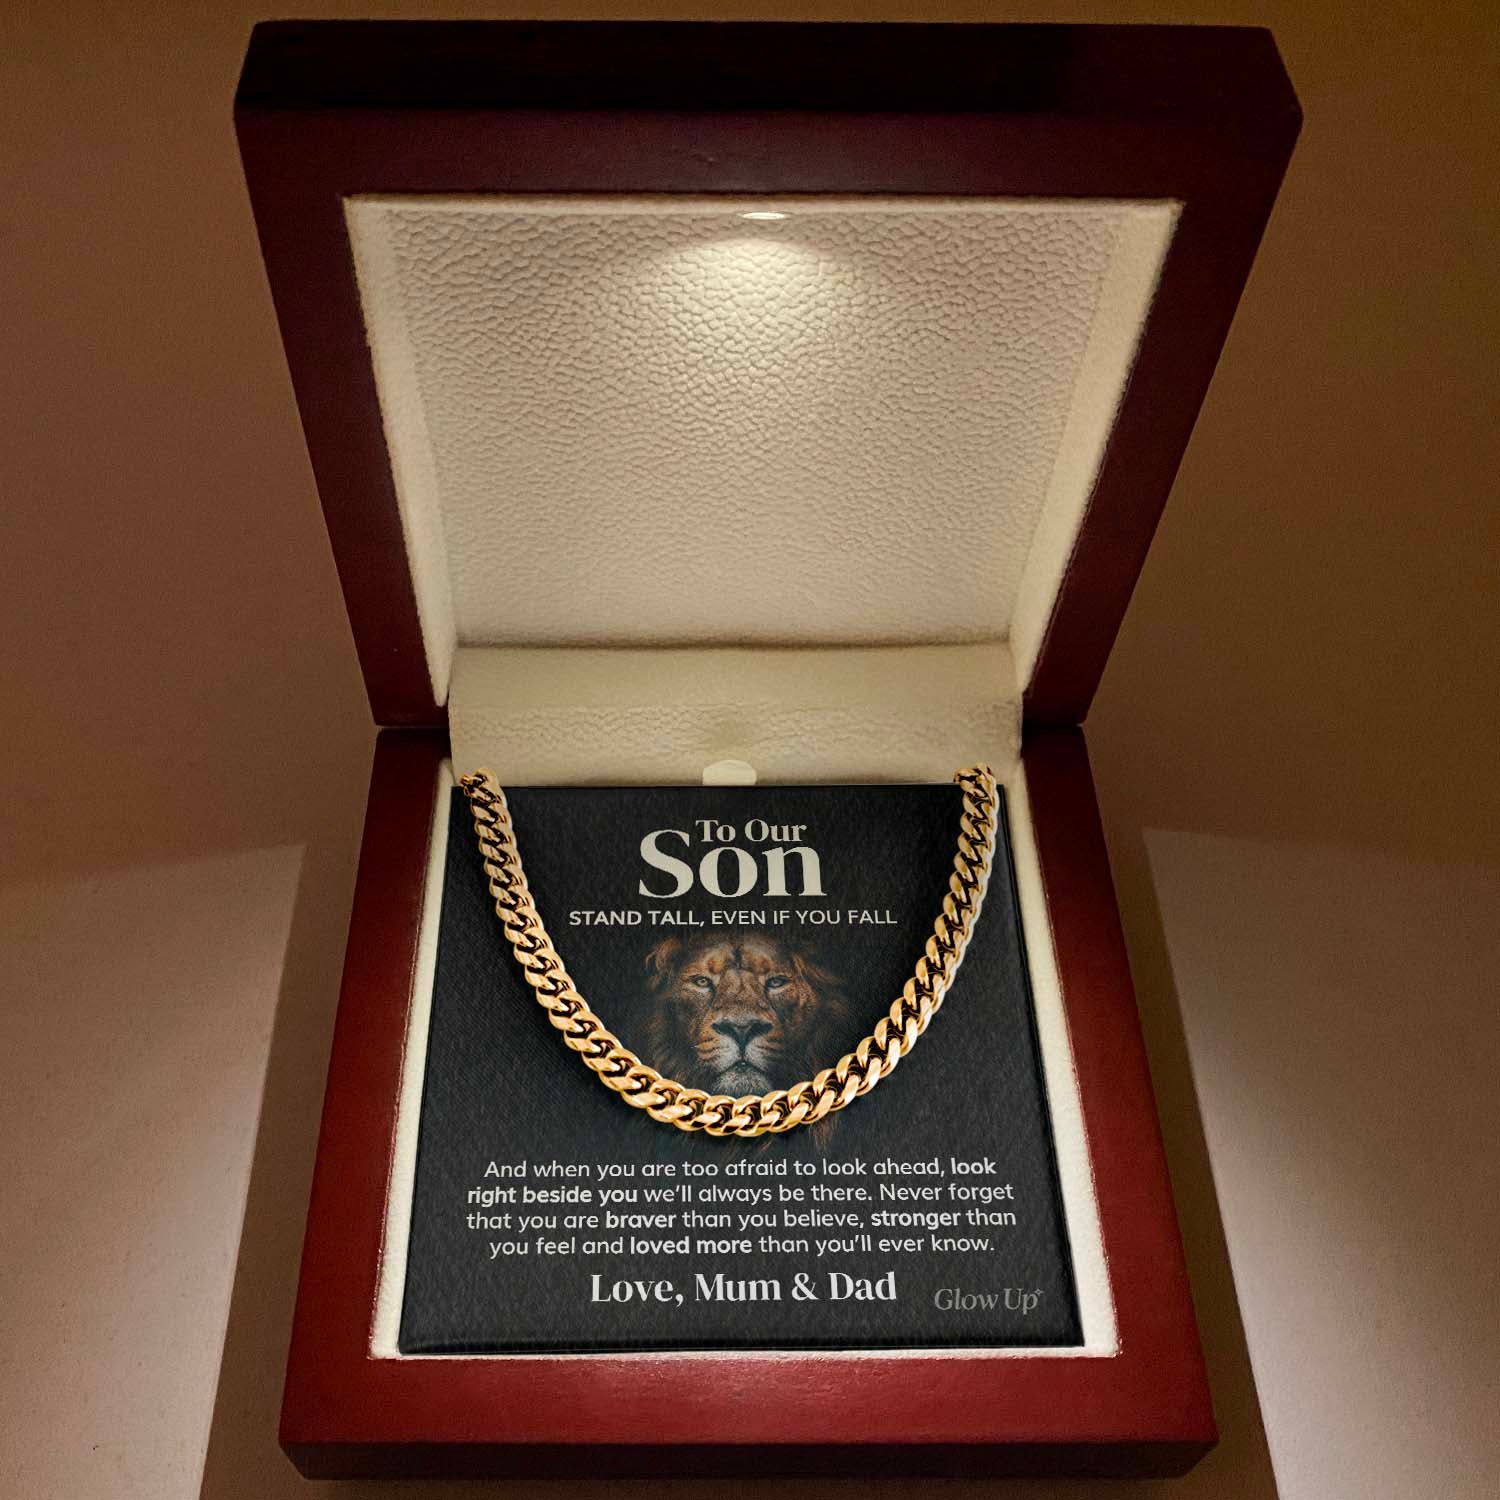 ShineOn Fulfillment Jewelry 14K Yellow Gold Finish / Luxury LED Box To Our Son from Mum and Dad - Stand tall - Cuban Link